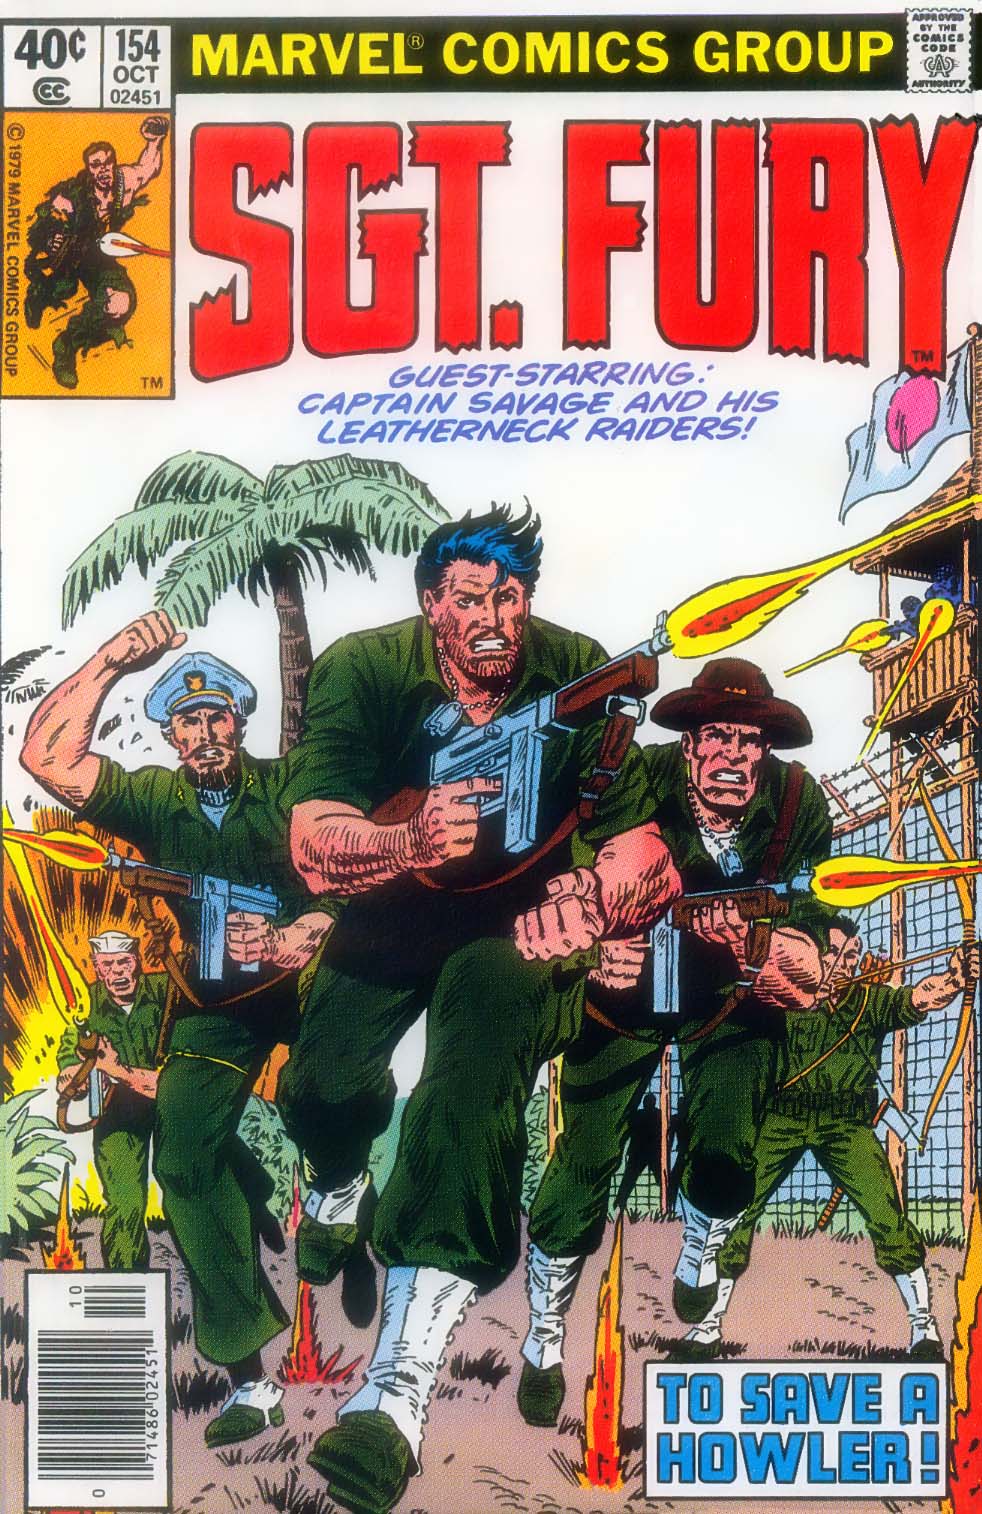 Read online Sgt. Fury comic -  Issue #154 - 1